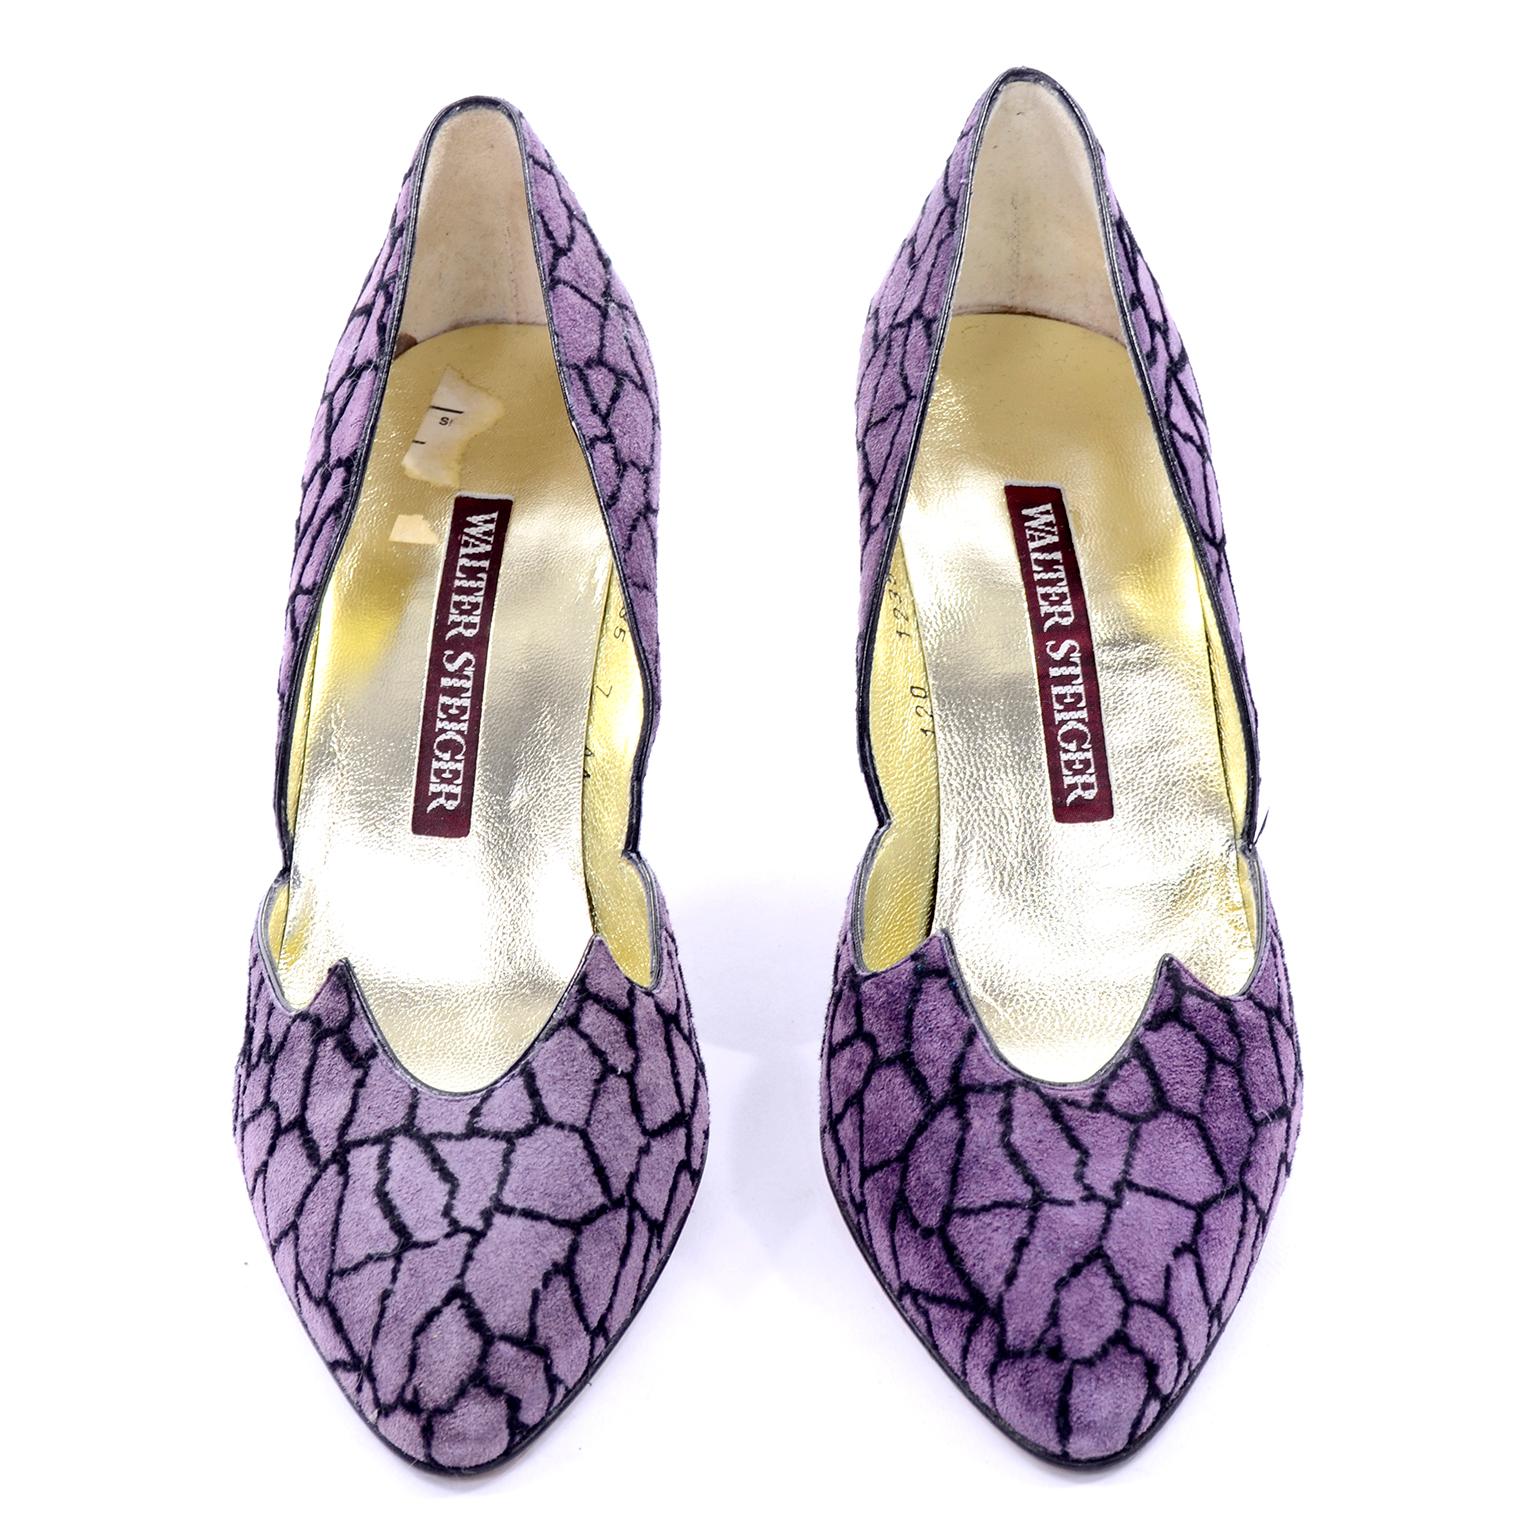 We are obsessed with vintage Walter Steiger footwear!  These purple suede heels have dramatic uppers with sharp cutwork and a giraffe or abstract pebbled black design. Size 7AA. Made in Italy. Never worn! 
HEEL: 3.5